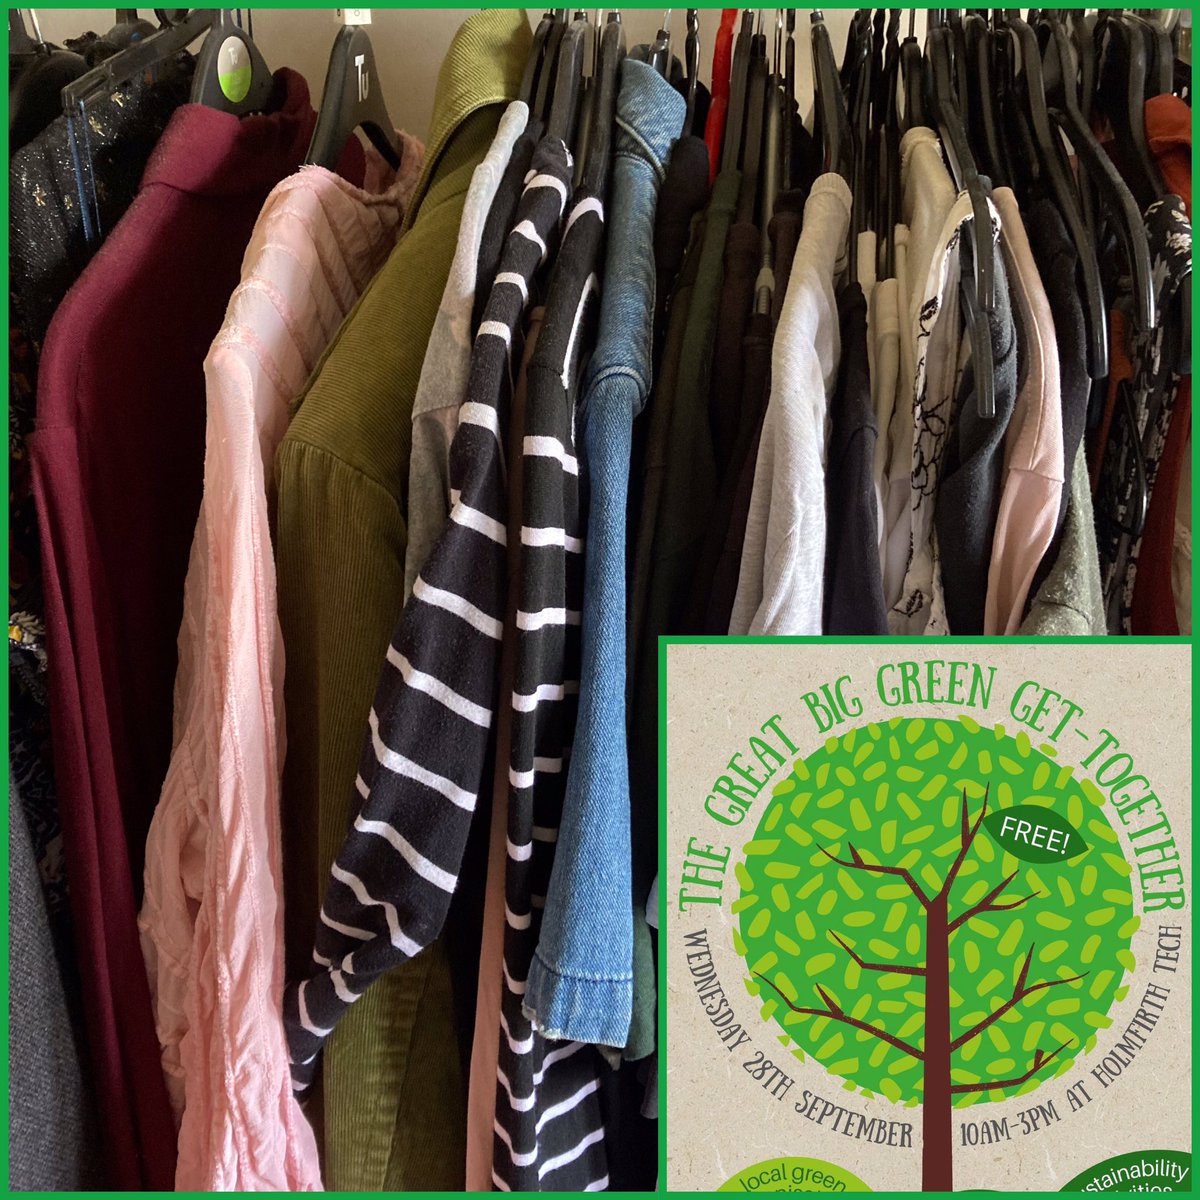 It’s #secondhandseptember!! Perfectly timed for our mini clothes swap at The Great Big Green Get-Together at @Holmfirth_Tech on 28th September.

Bring unwanted items from your wardrobe to swap for new ones! Sustainable fashion at its best ♻️ 🌍